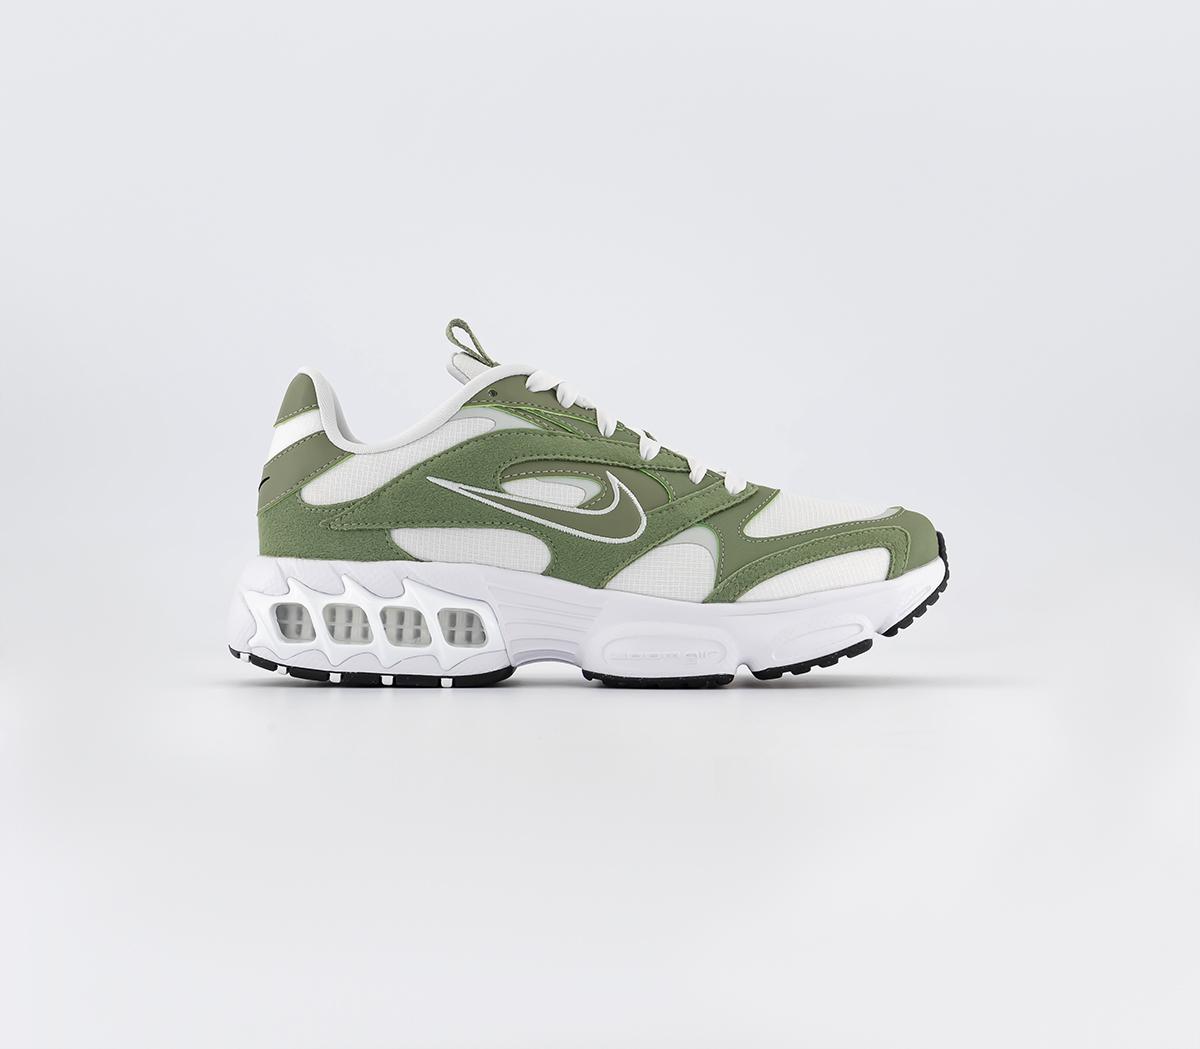 over Versnellen veeg Nike Nike Zoom Air Fire Trainers Oil Green Summit White Light Silver -  Women's Trainers